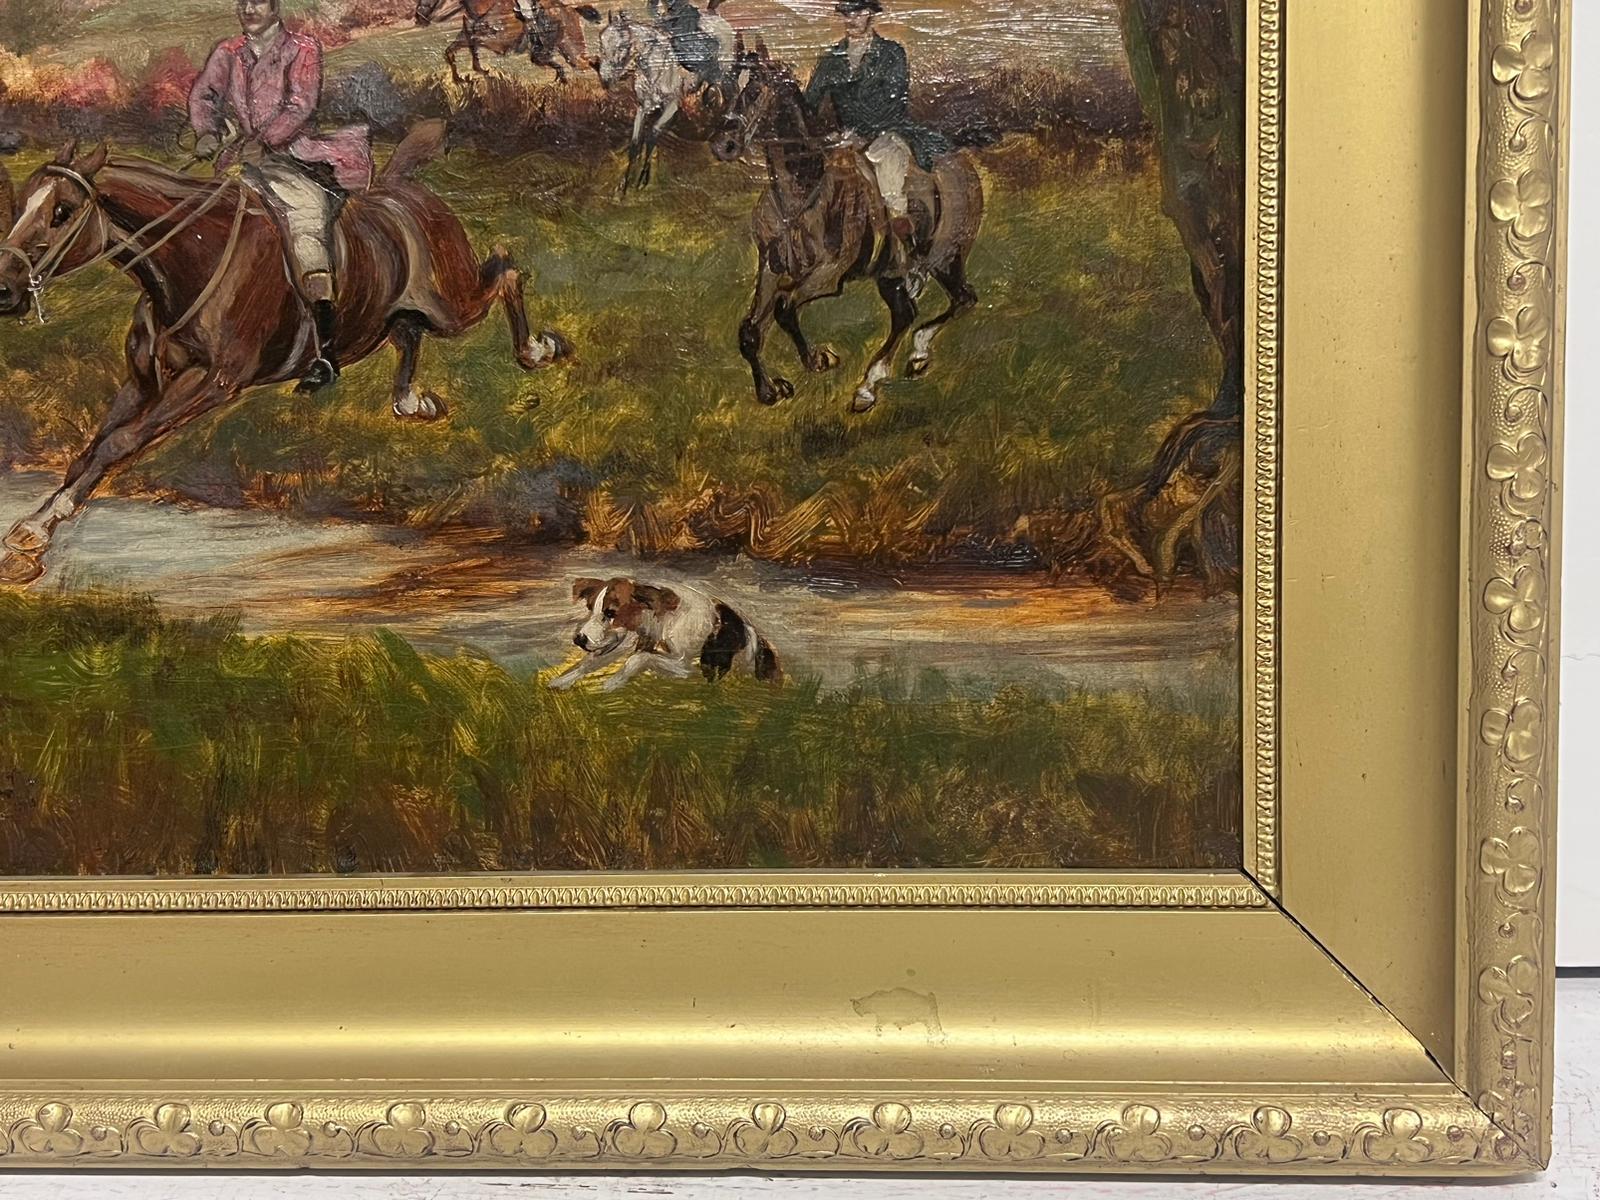 The Fox Hunt
English School (19th Century)
oil on canvas, framed
framed: 21 x 29 inches
canvas: 16 x 24 inches
provenance: private collection, England
condition: very good and sound condition, showing its age but good. 